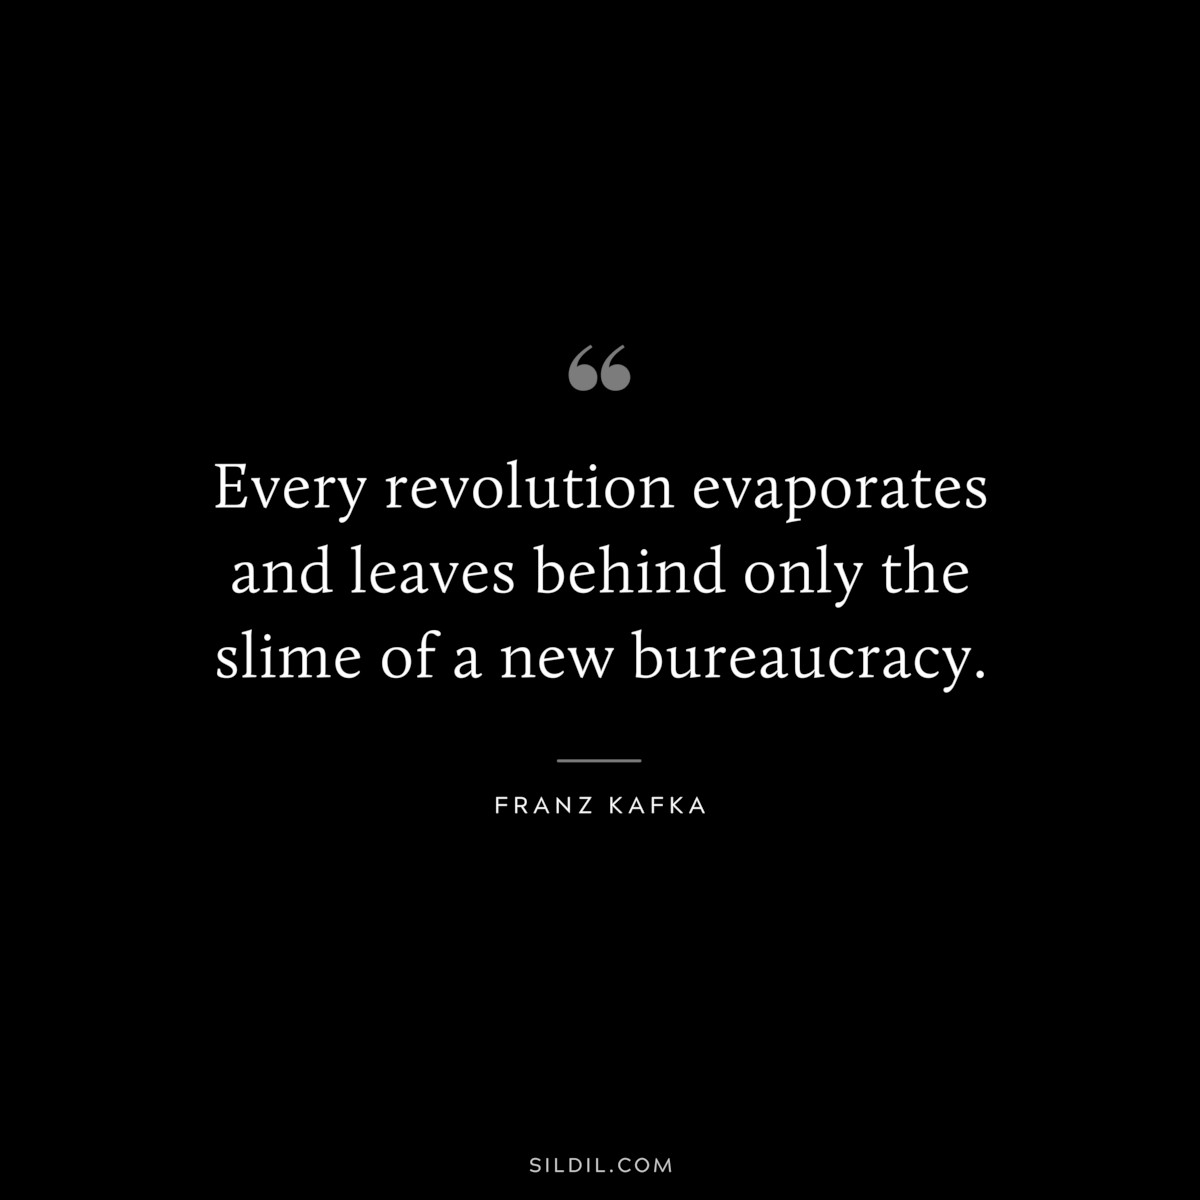 Every revolution evaporates and leaves behind only the slime of a new bureaucracy. ― Franz Kafka